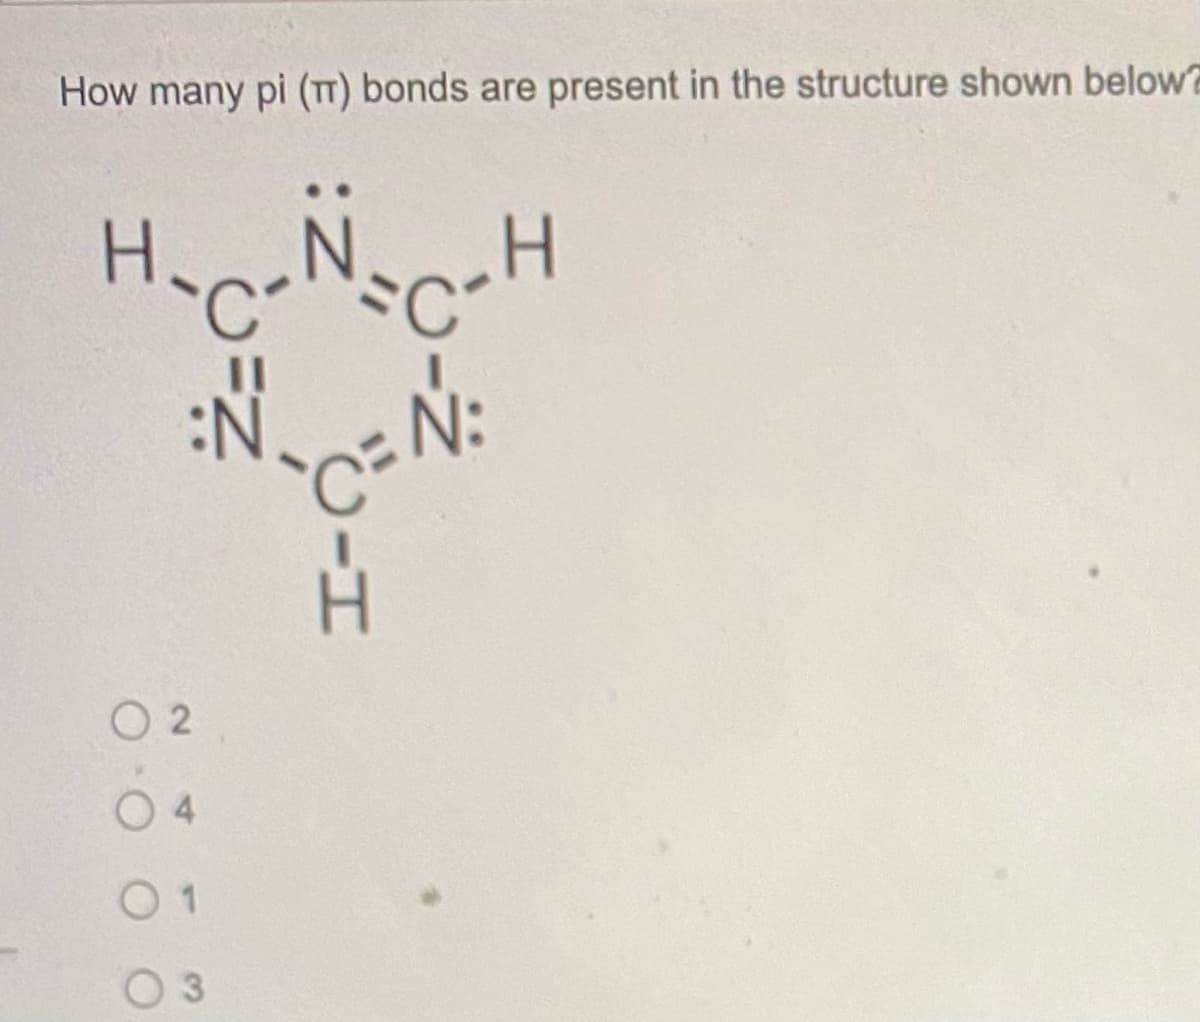 How many pi (T) bonds are present in the structure shown below?
ーH
ーエ
O 2
0 4
0 1
O 3
「-エ
